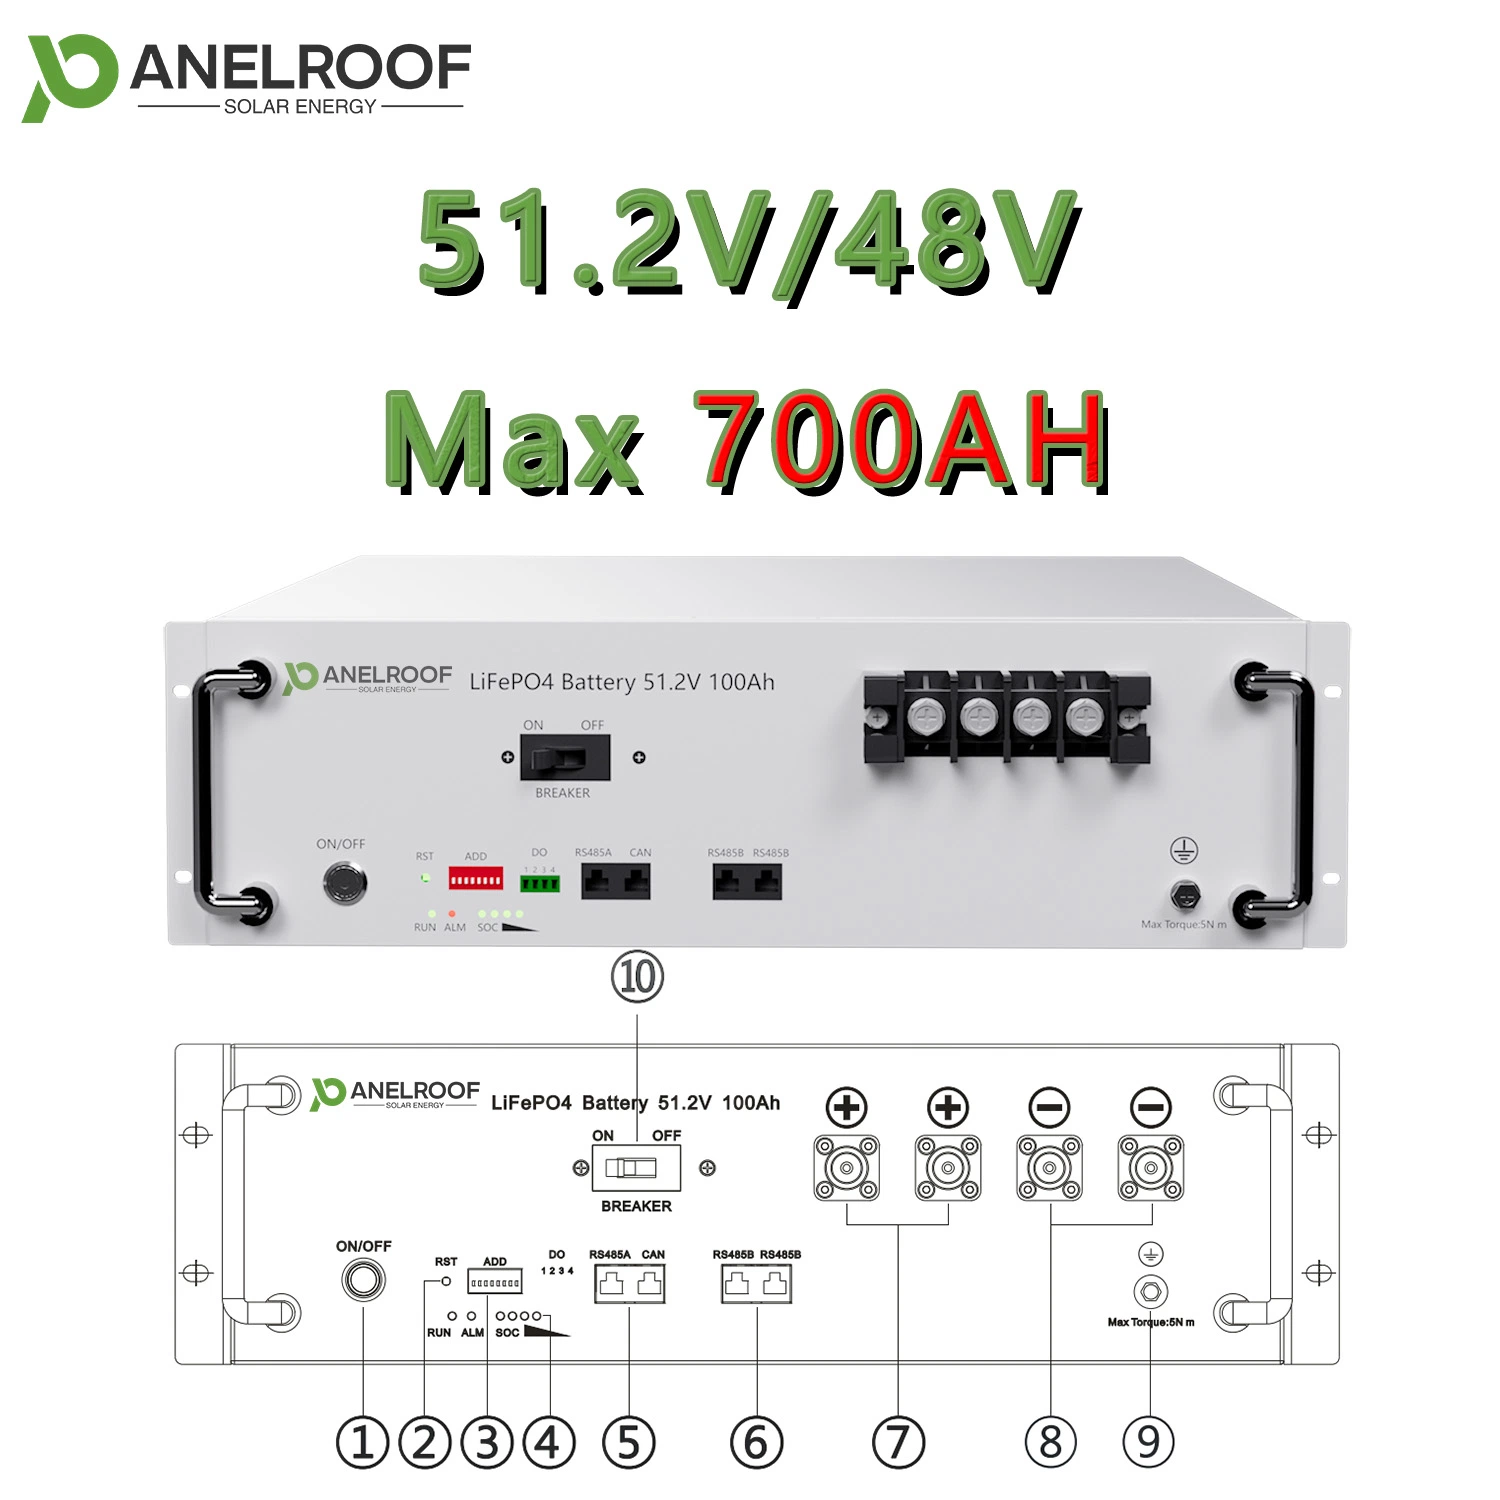 Panelroof Max 700ah 400A Working Current 48V 51.2V 35kwh Lithium Storage Battery